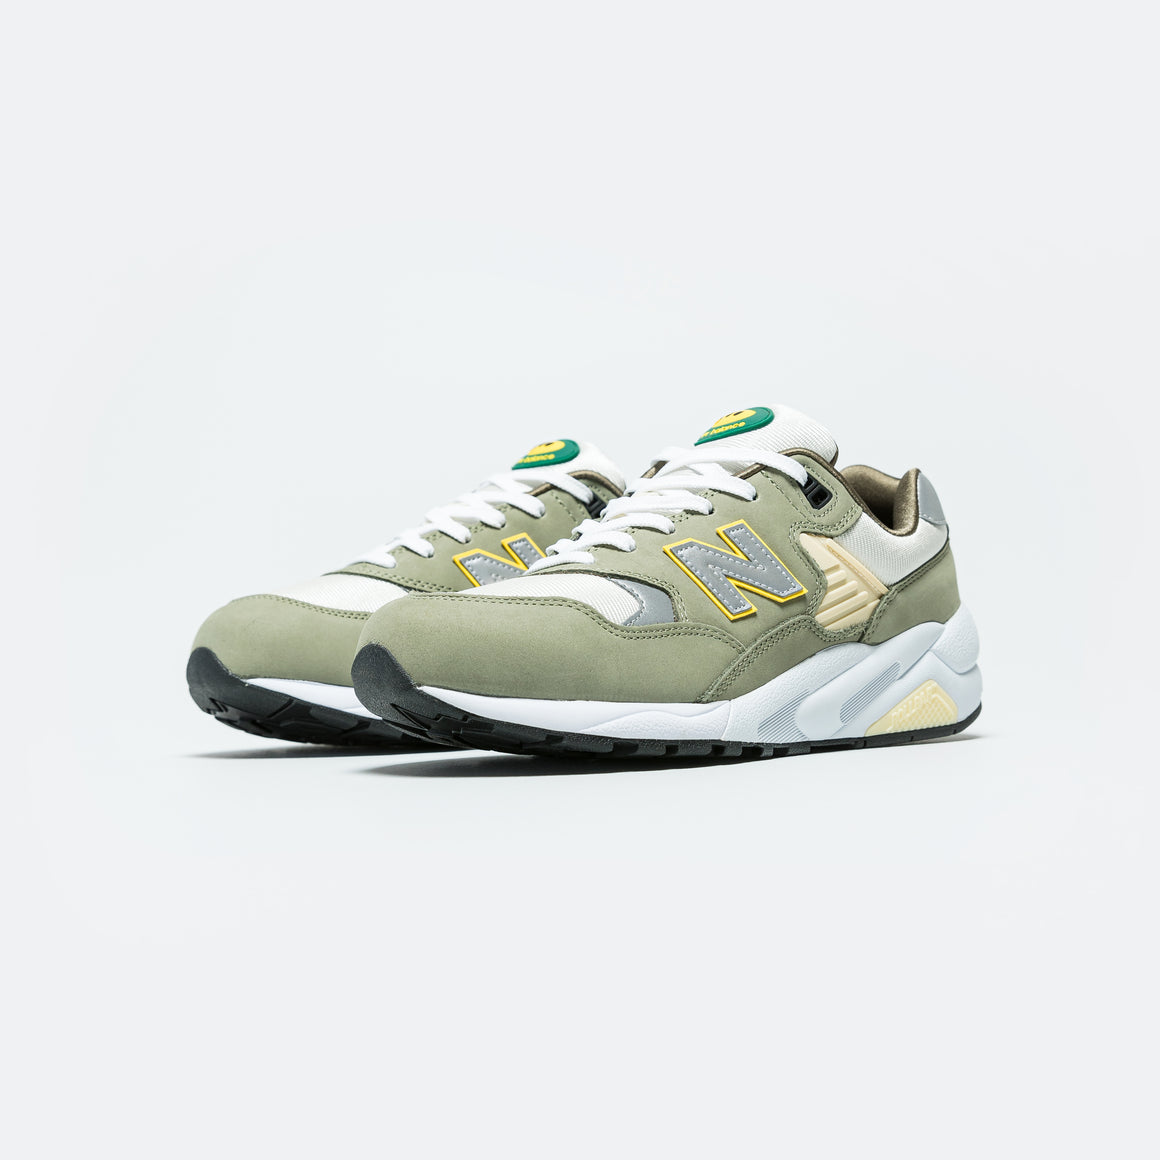 New Balance - MT580AC2 - UP THERE